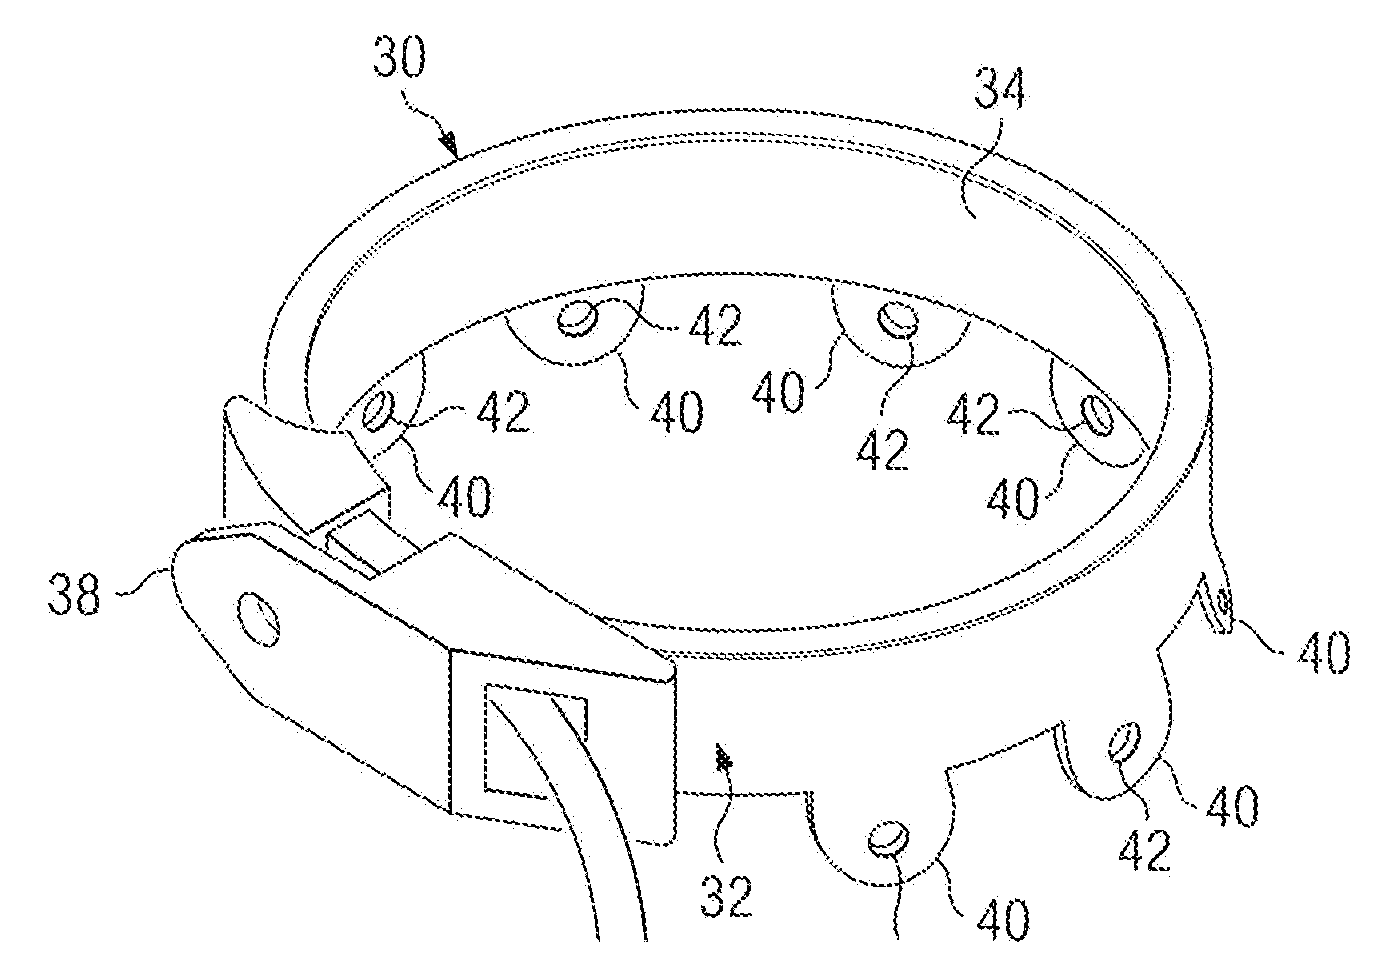 Method of and apparatus for prevention of adjustable gastric band slips